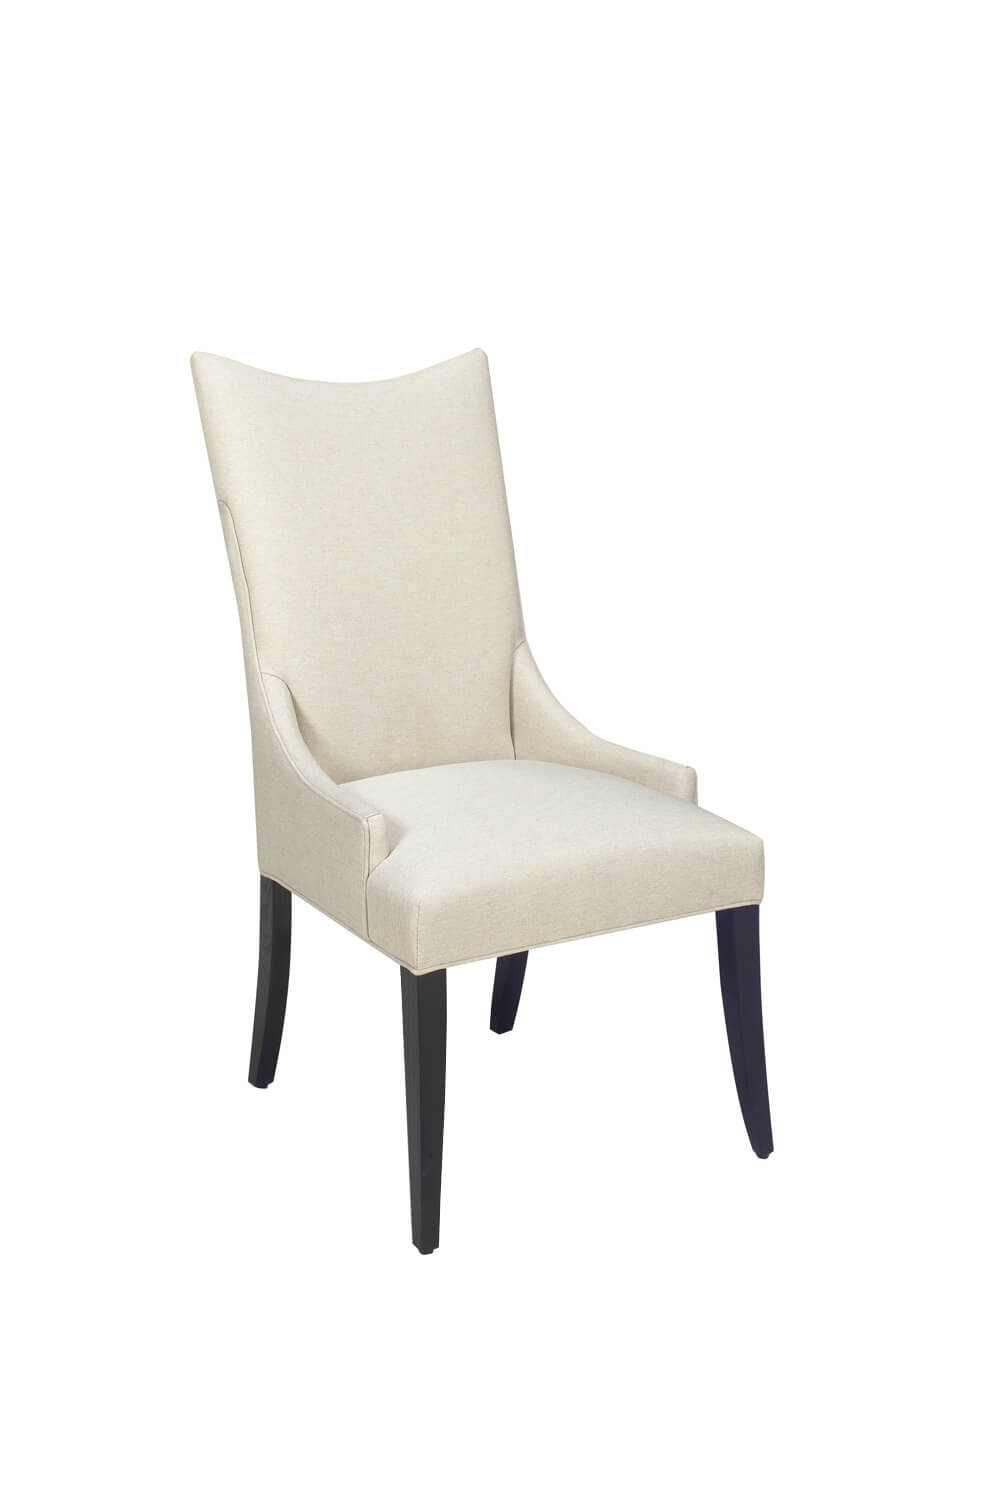 #1200 Modern Upholstered Wood Dining Chair